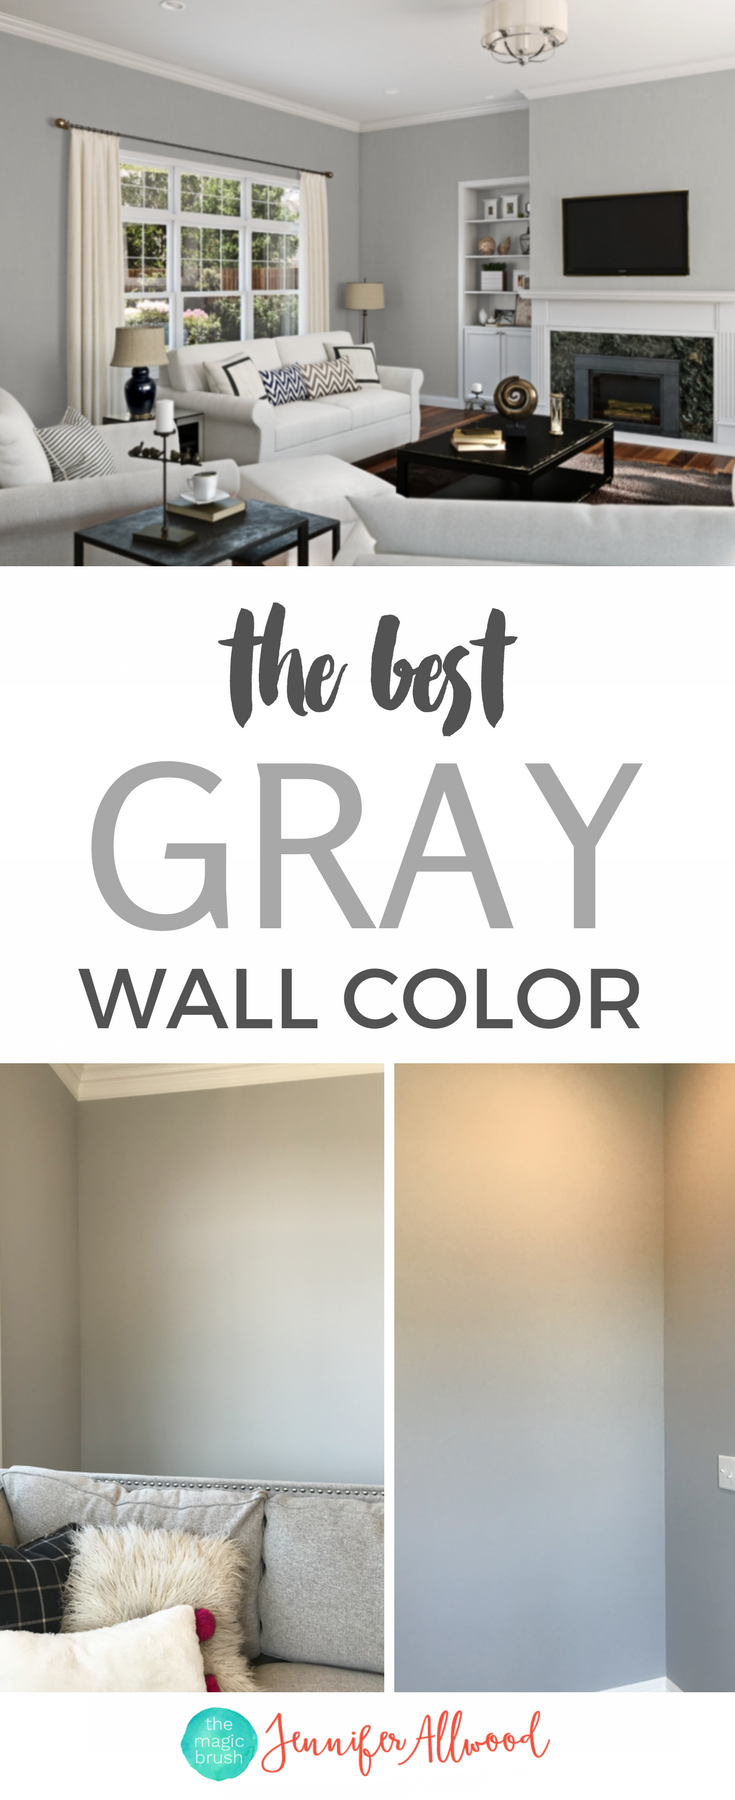 The best GRAY wall color by Jennifer Allwood #graypaintcolors #lightfrenchgray #sherwinwilliams #homecolors #wallcolors